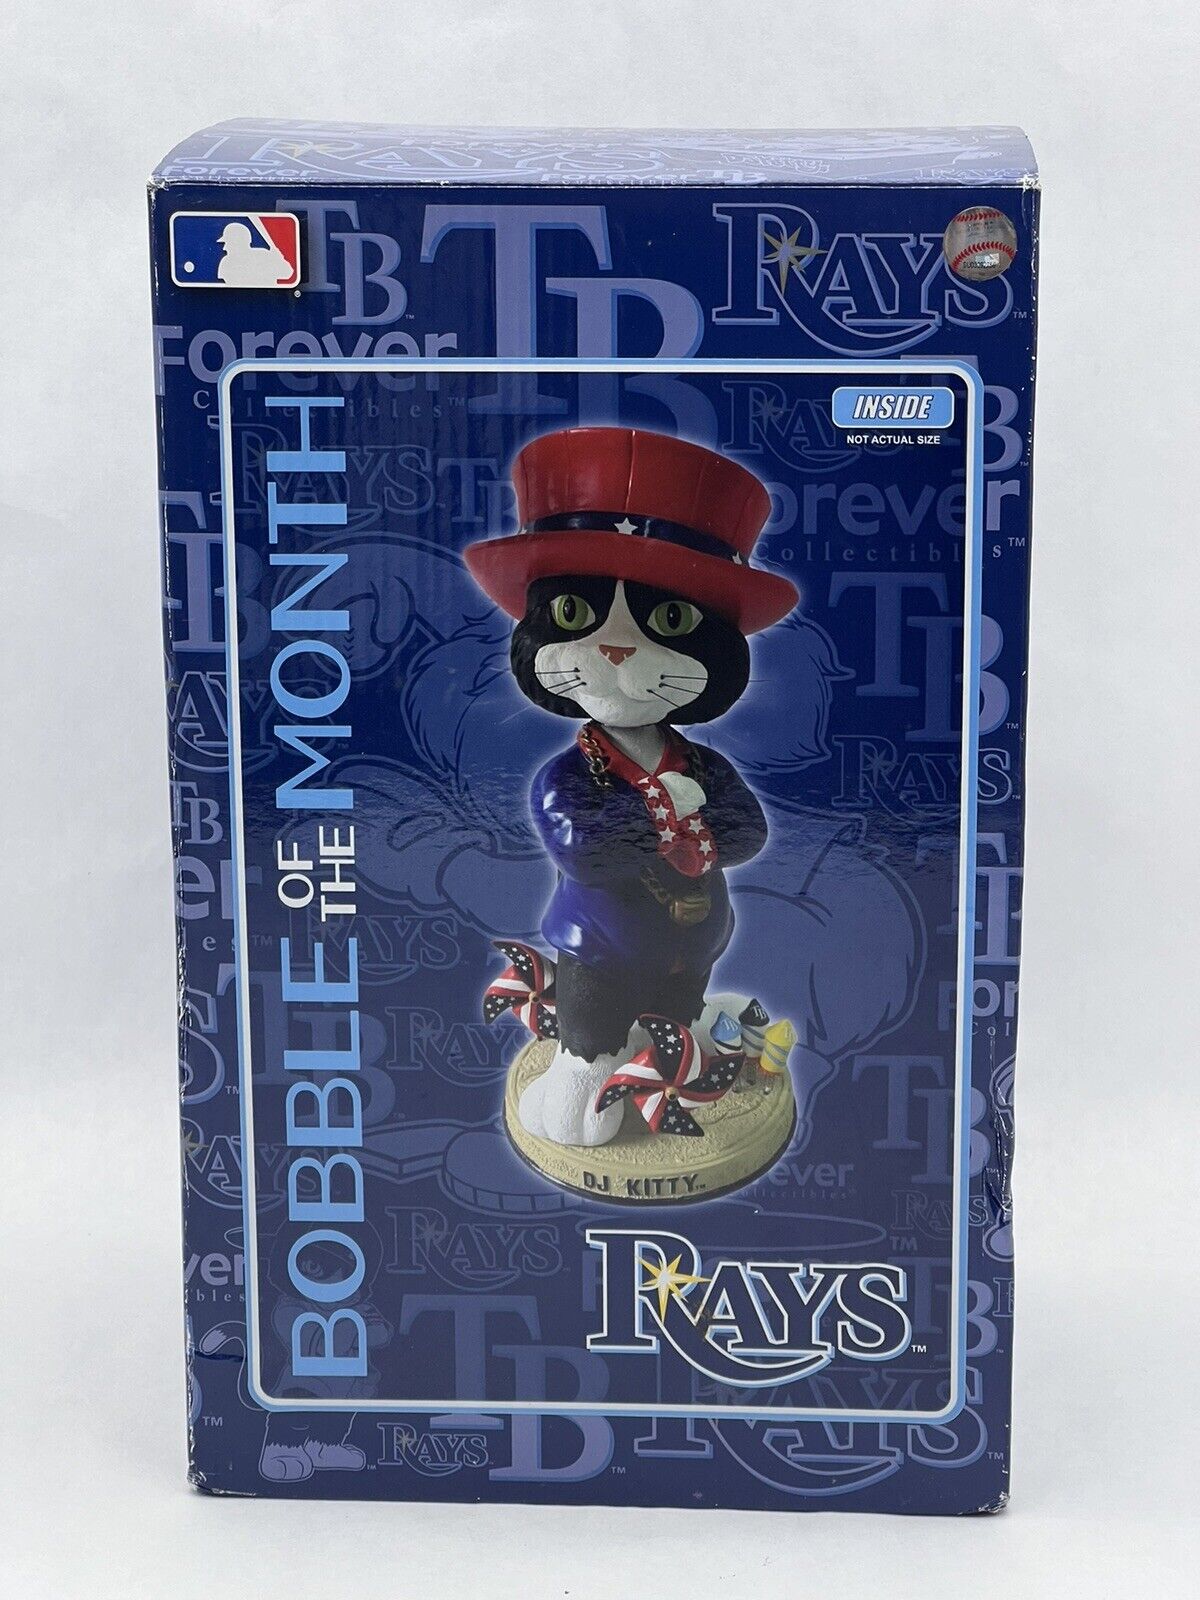 Tampa Bay Rays DJ Kitty 4th of July Bobblehead Bobble Of The Month Limited Ed.